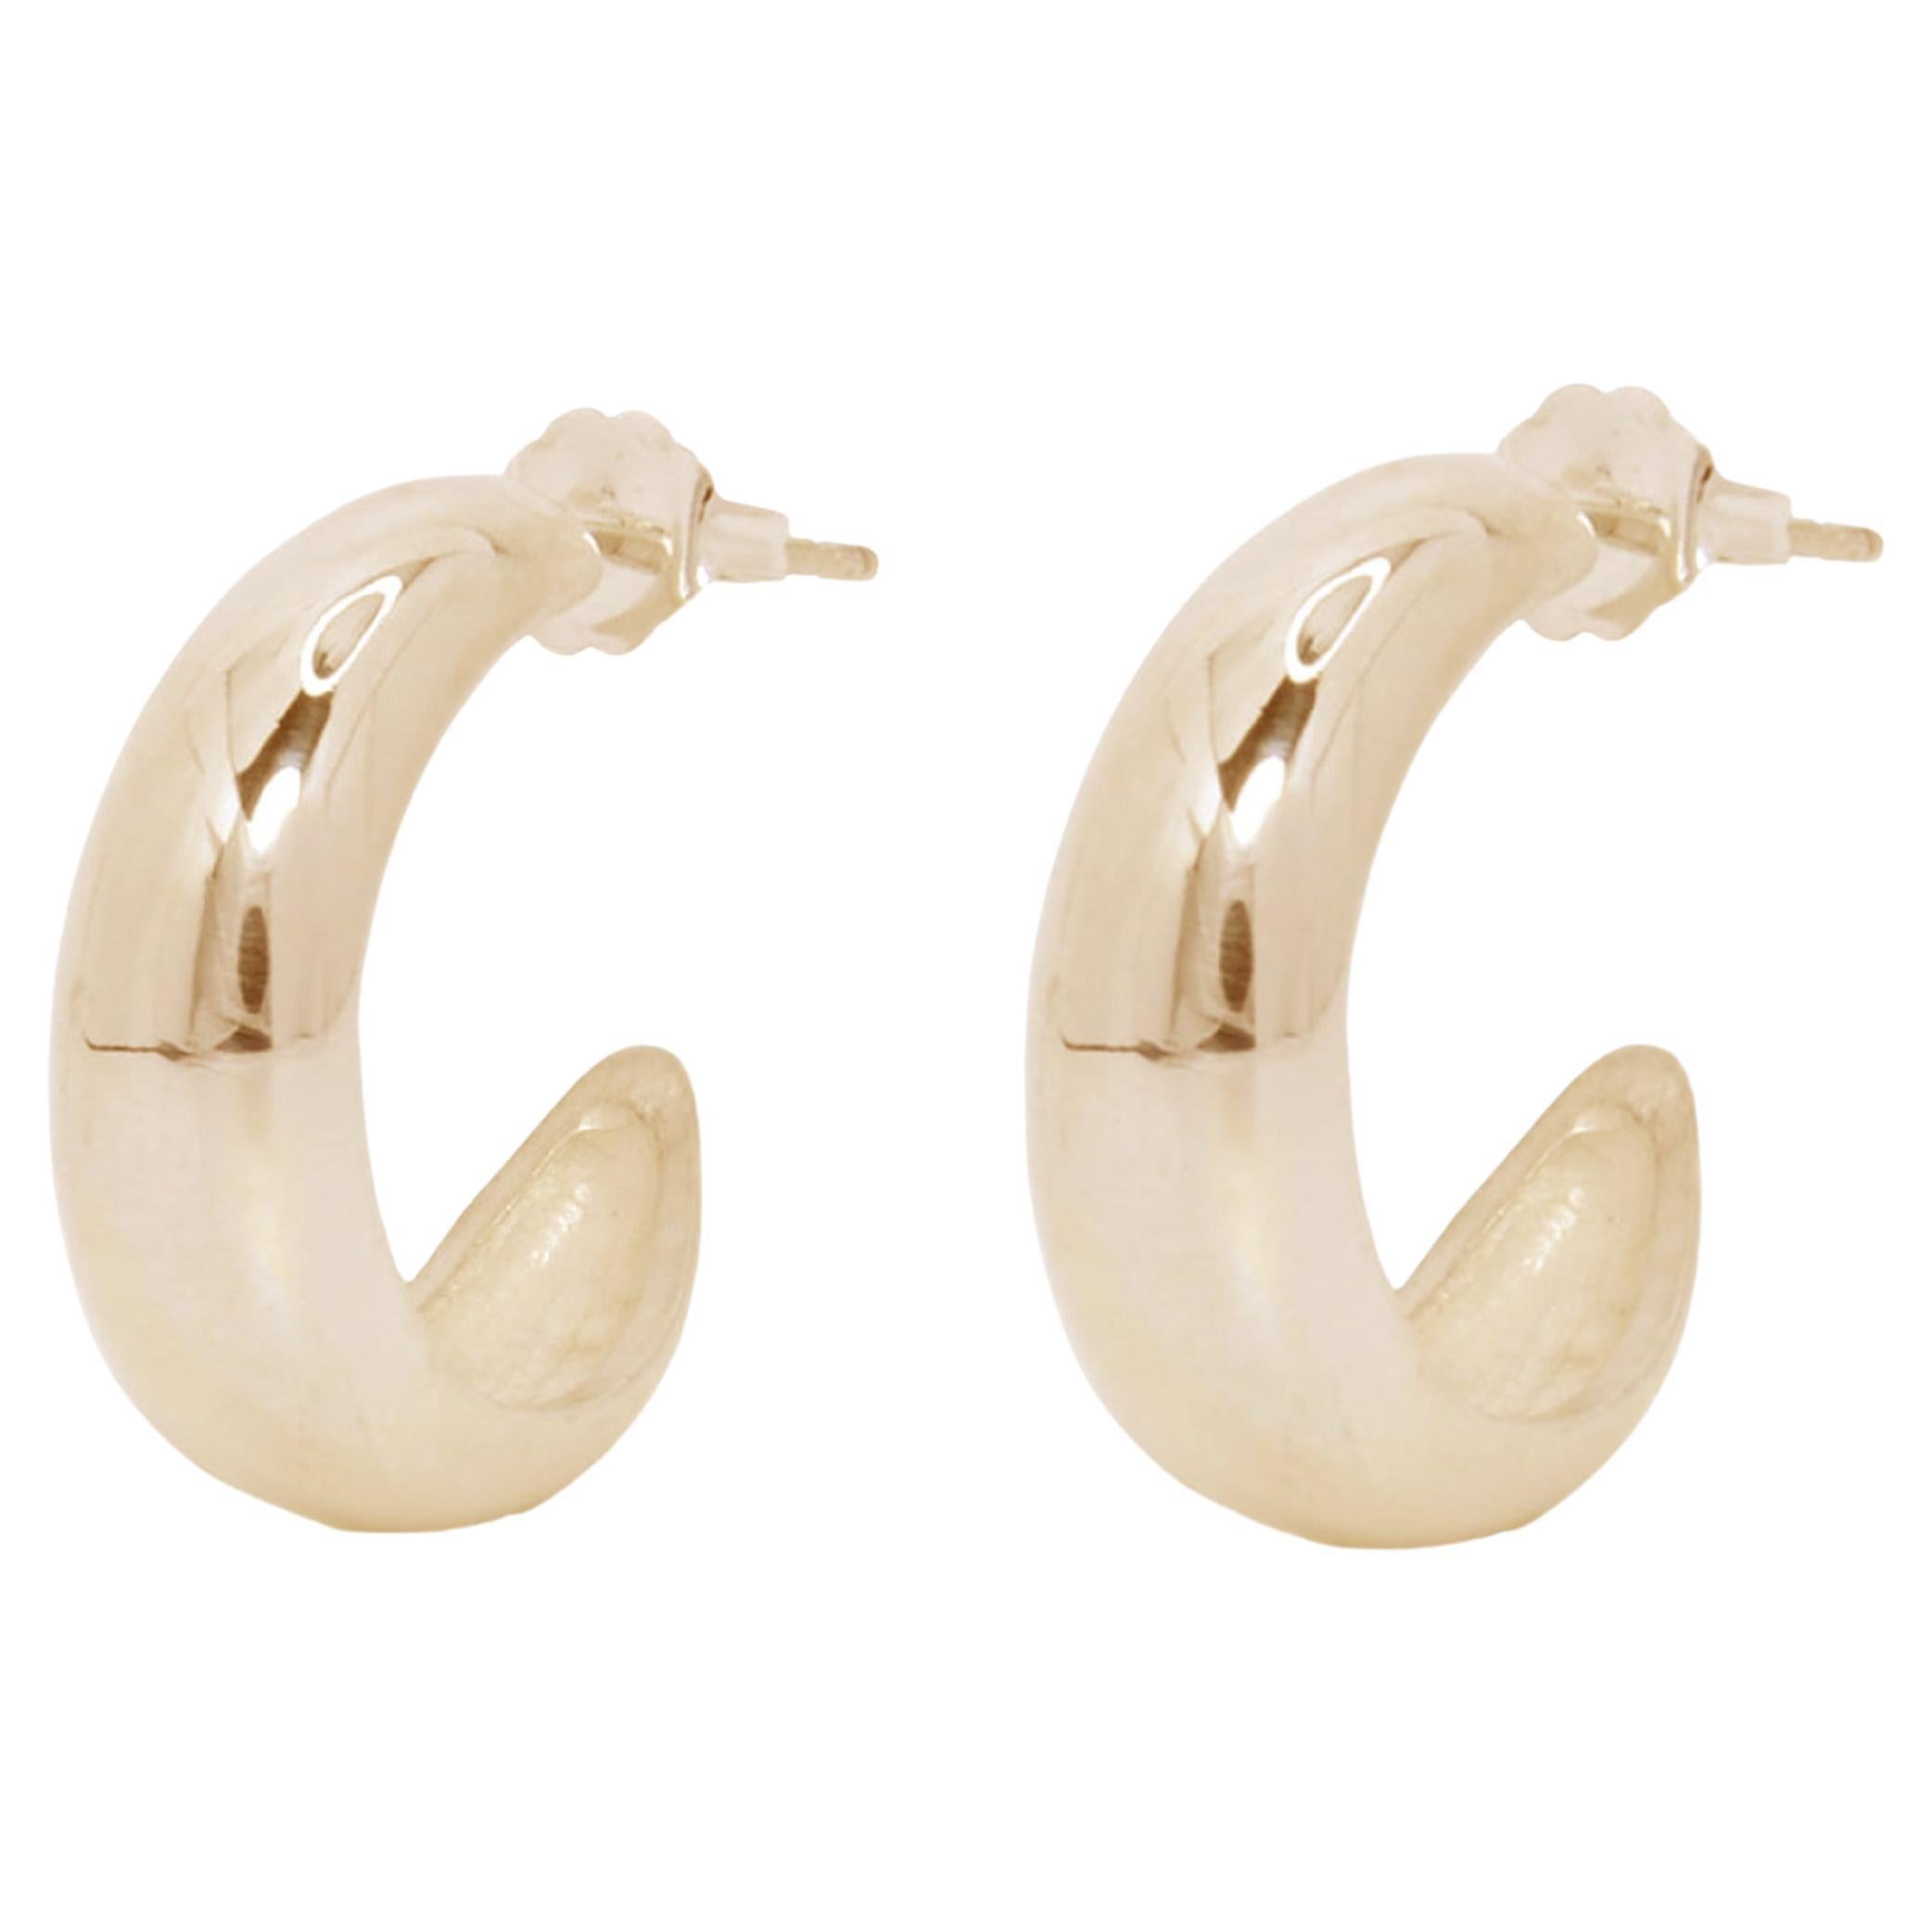 Ruth Nyc, Proto Hoop Earrings in 14k Yellow Gold For Sale